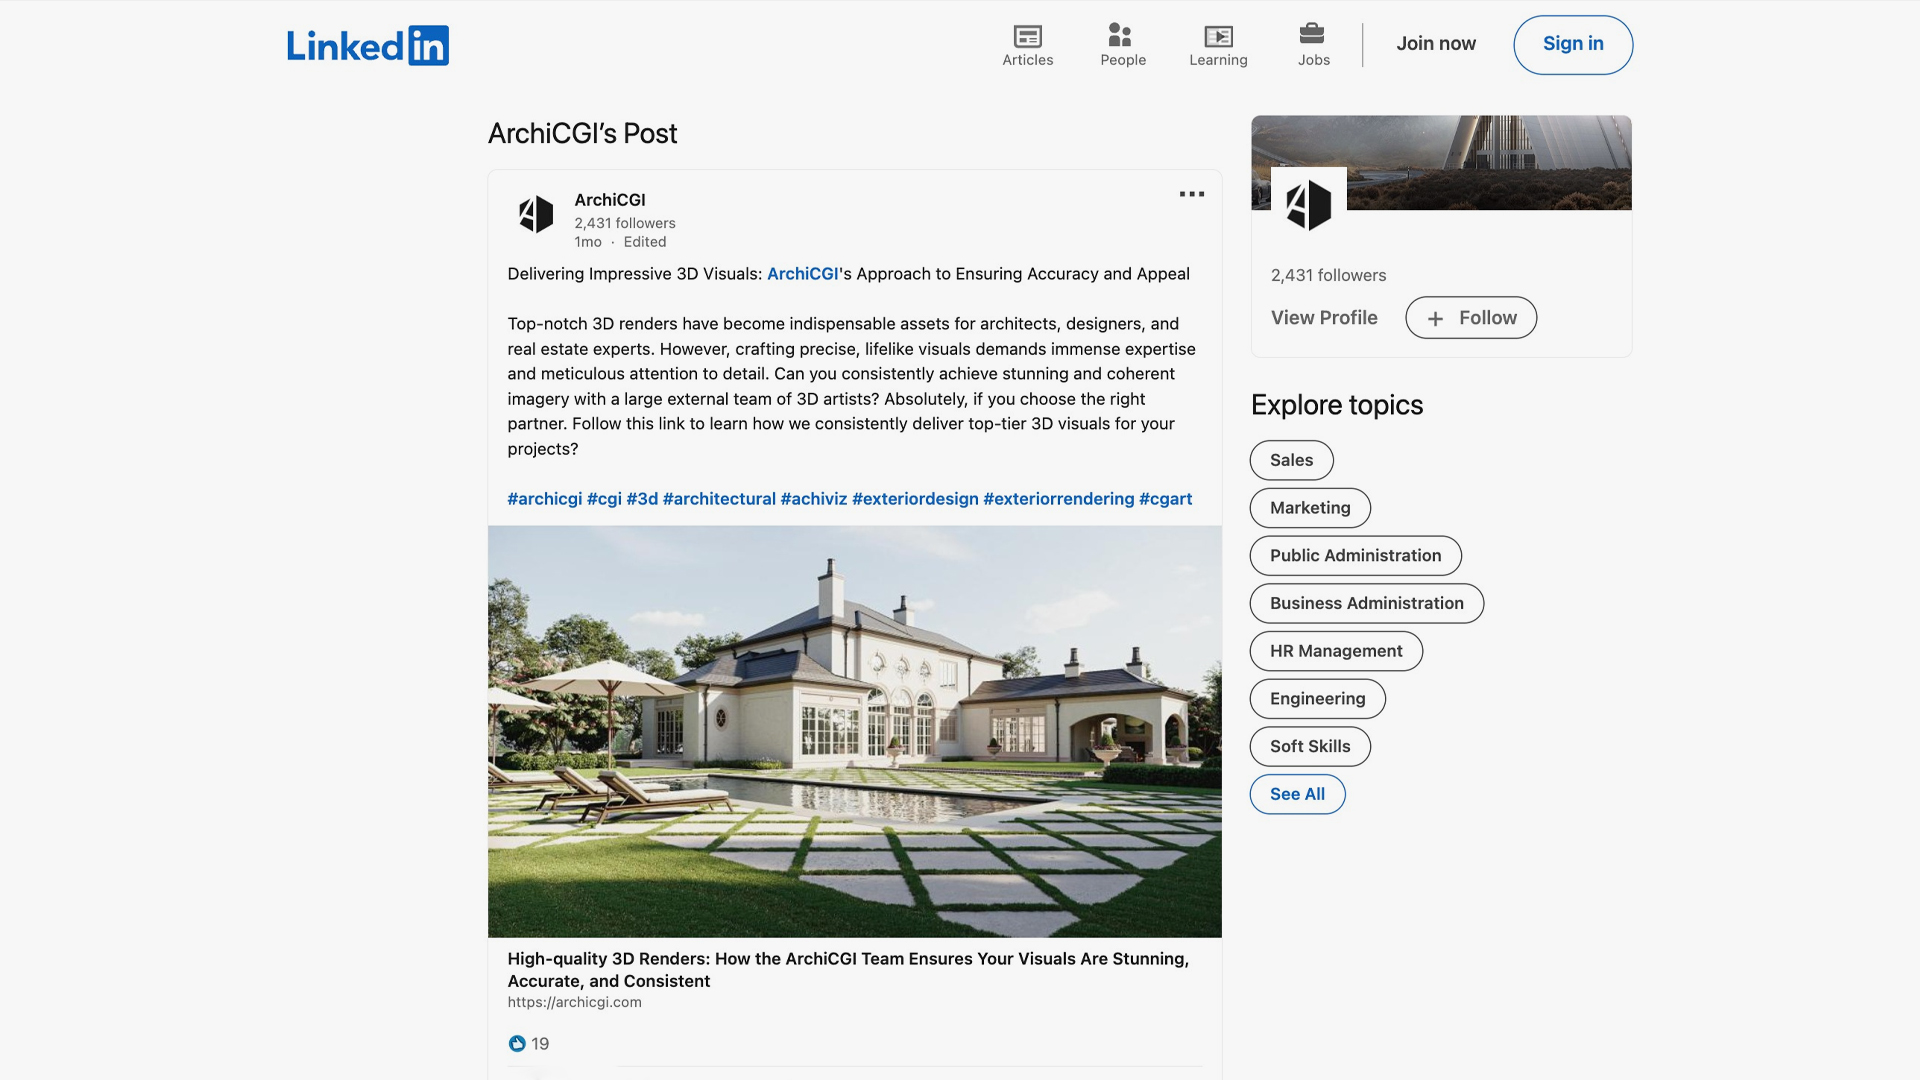 Sharing Useful Information on LinkedIn for Architects